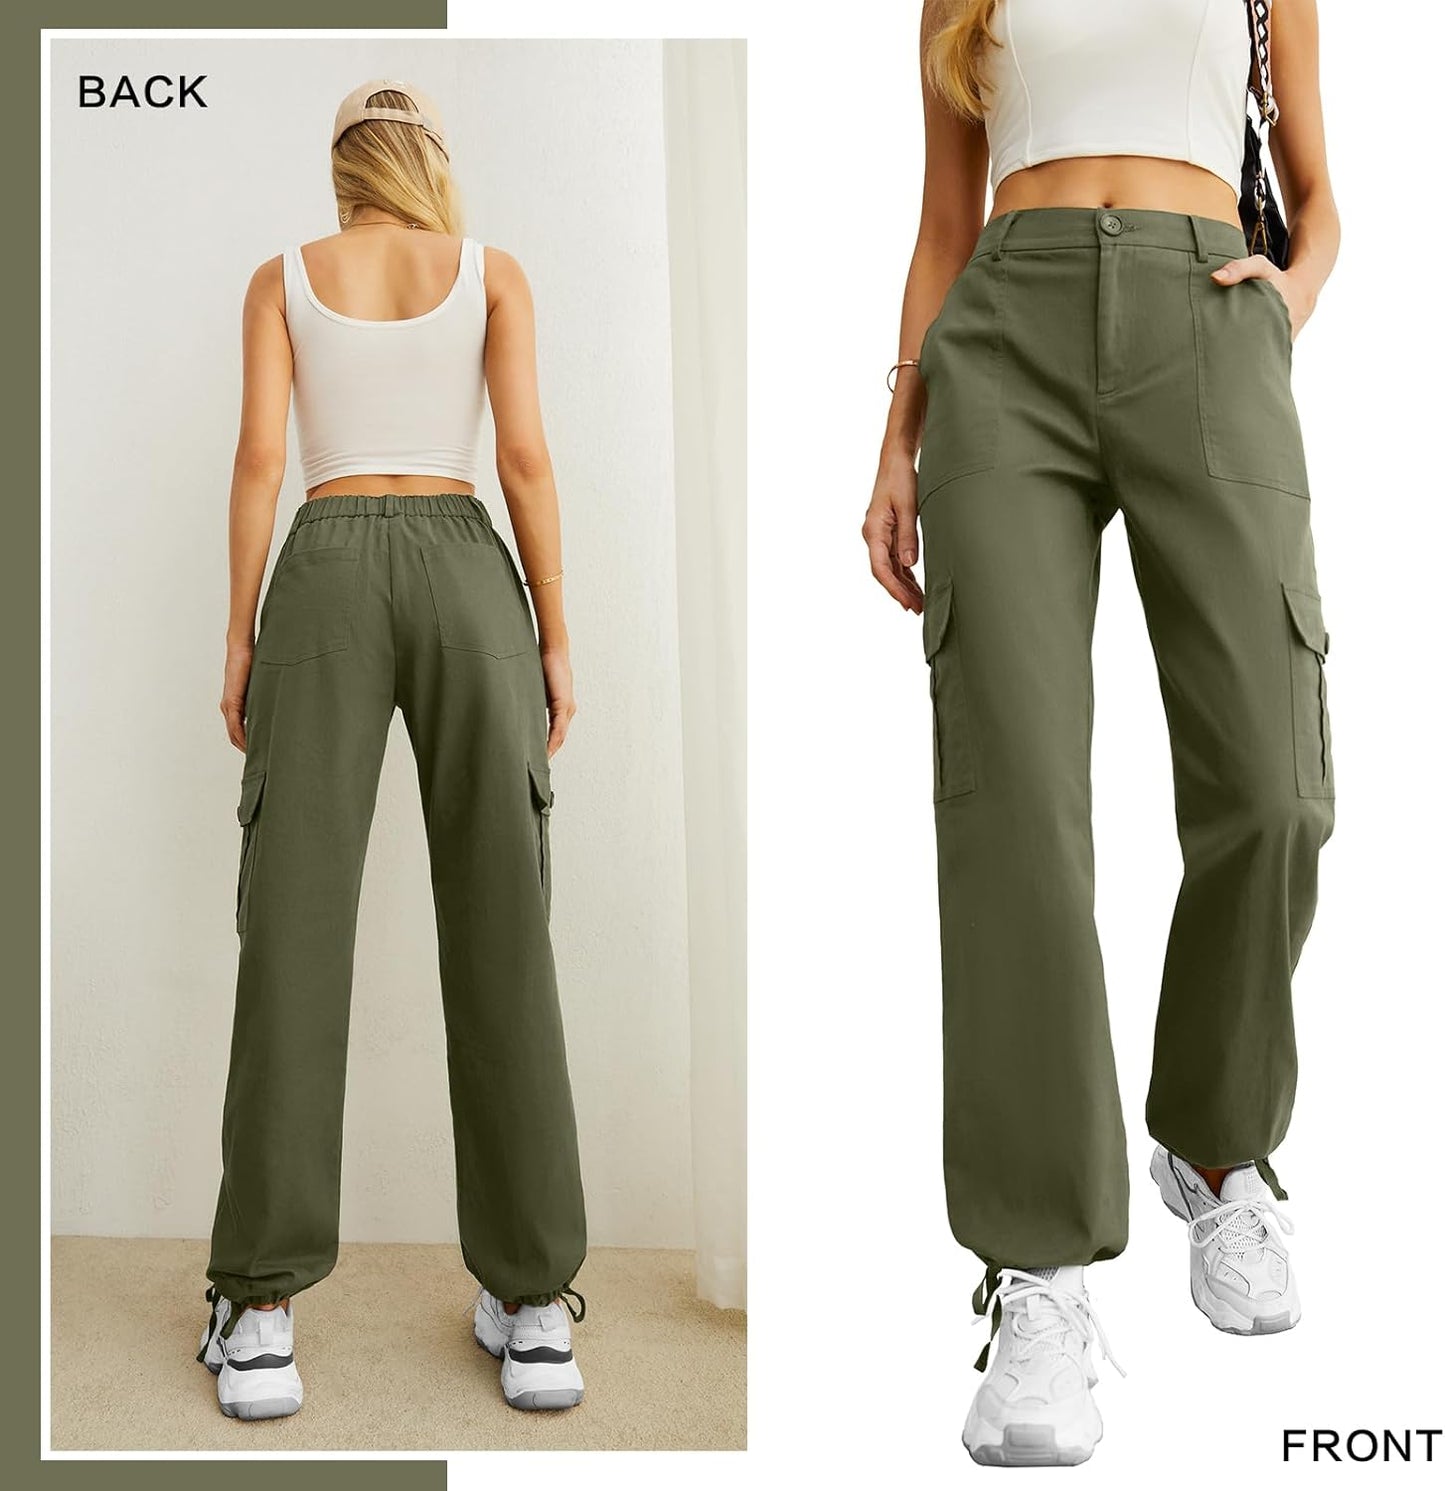 Women's High Waisted Cargo Pants Stretchy Pants 